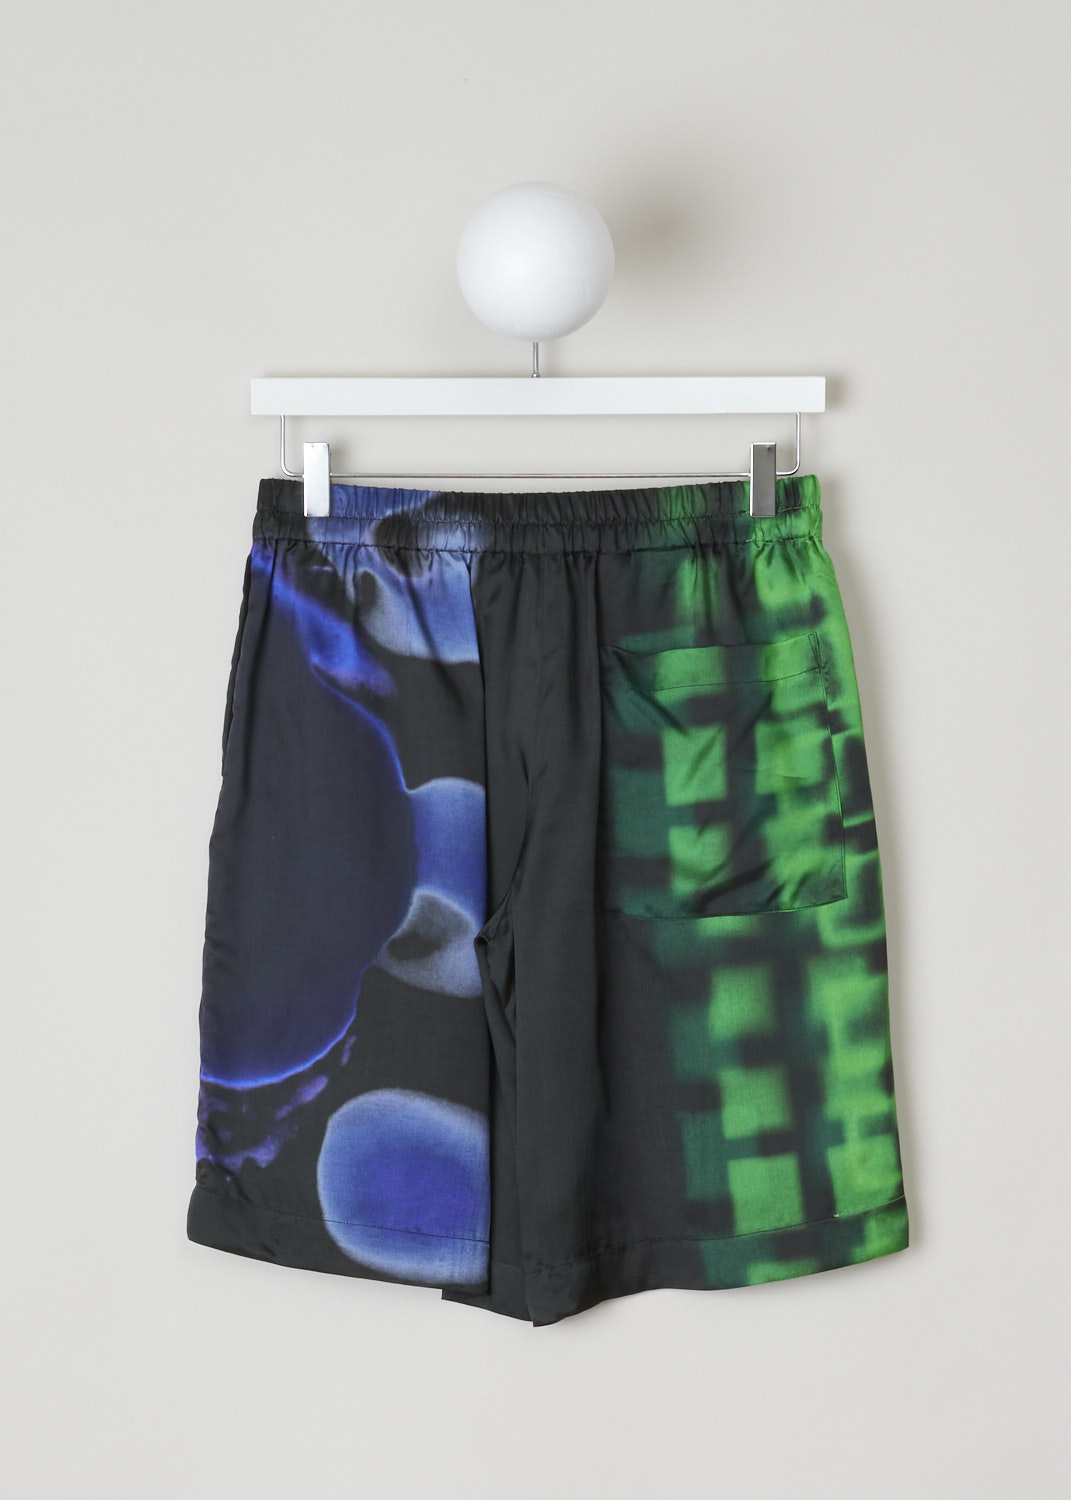 Dries van Noten, Sporty shorts, POMAR_LONG_2068_WW_PANTS_GRE, black green print, back, Viscose twill shorts, decorated with a graphic print coloured in blue, green and a splash of purple. Featuring an elastic waistband with a drawstring. Furthermore, this model comes with a high-waist and loose fit, concealed pockets can be found on the side seam and has a single jetted pocket on the back.